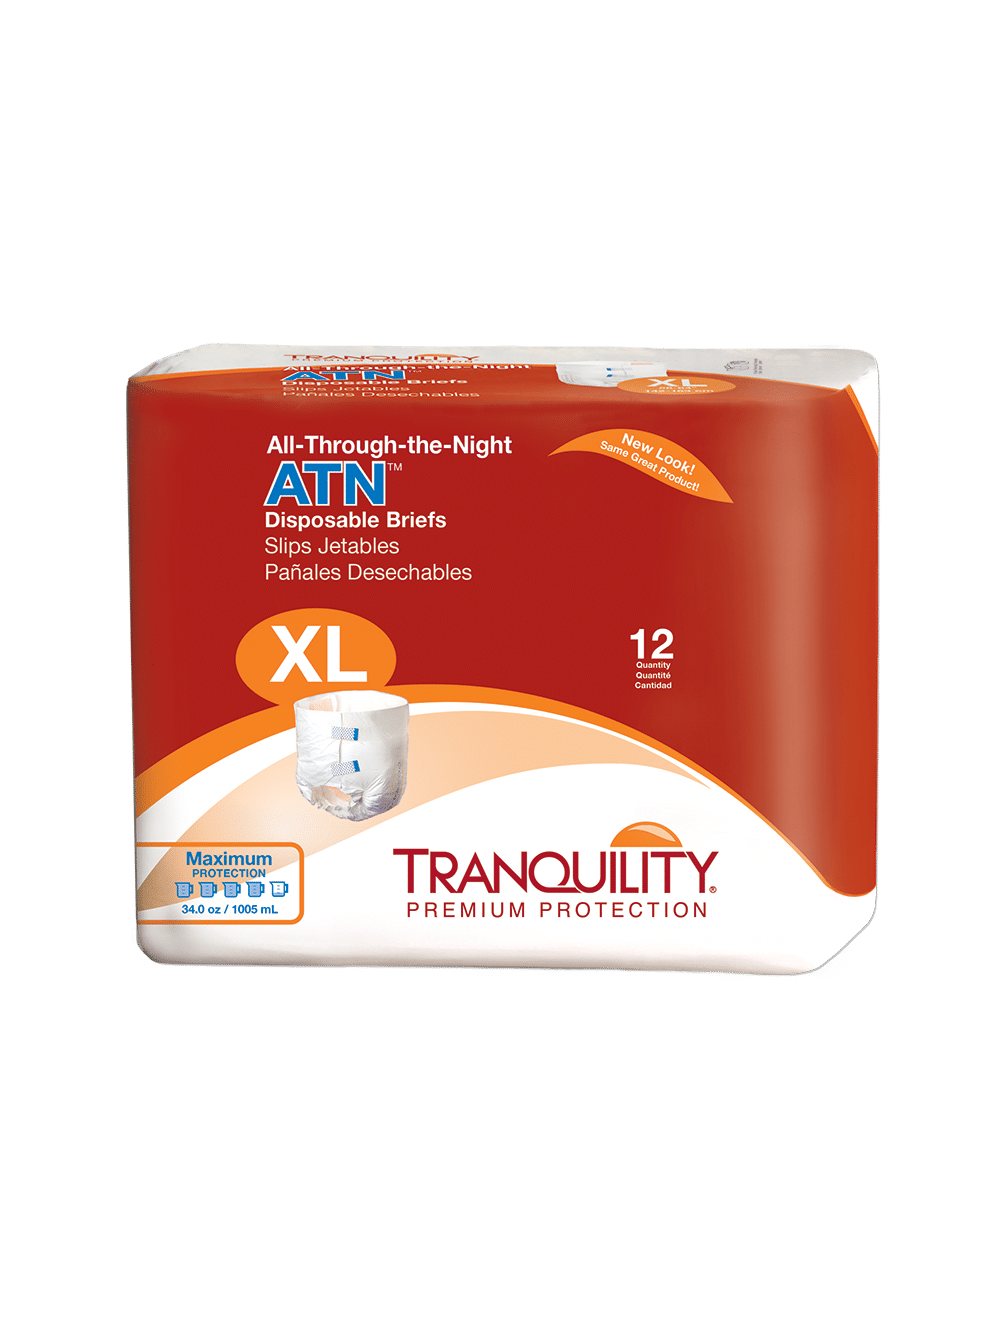 Principle Business Tranquility Premium Overnight Disposable Absorbent  Underwear